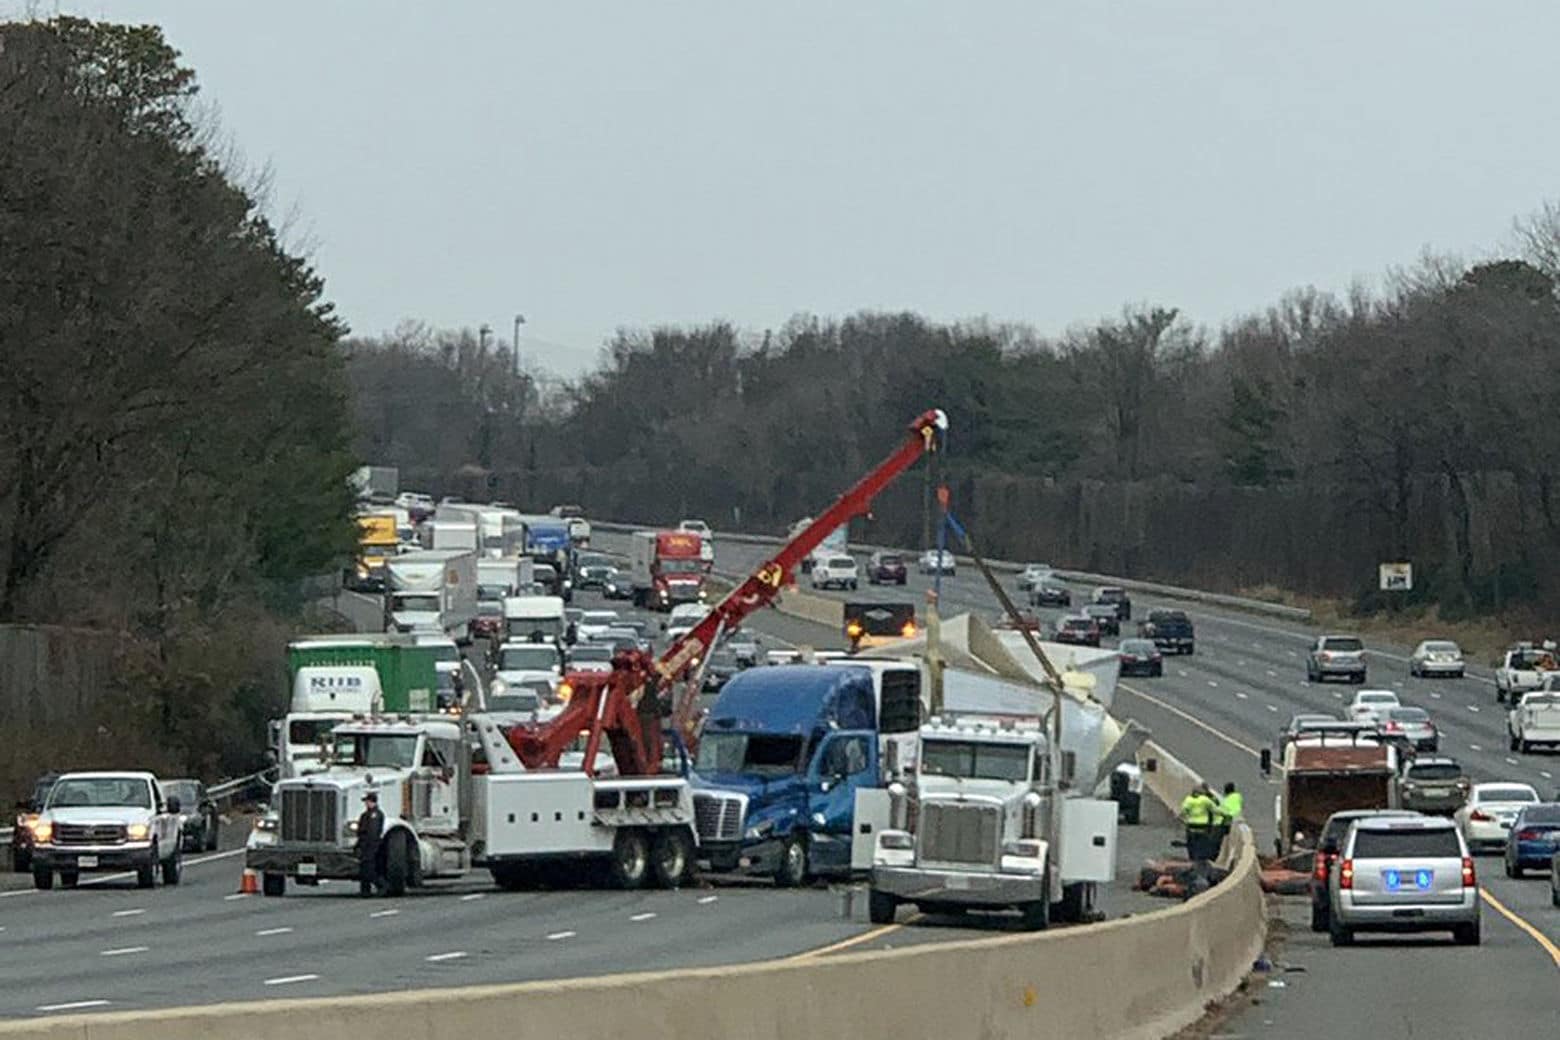 Officials worked for hours to clean up the crash site of an overturned tractor trailer Friday in Prince George's County, Maryland. (Courtesy John Barnhardt via Twitter)